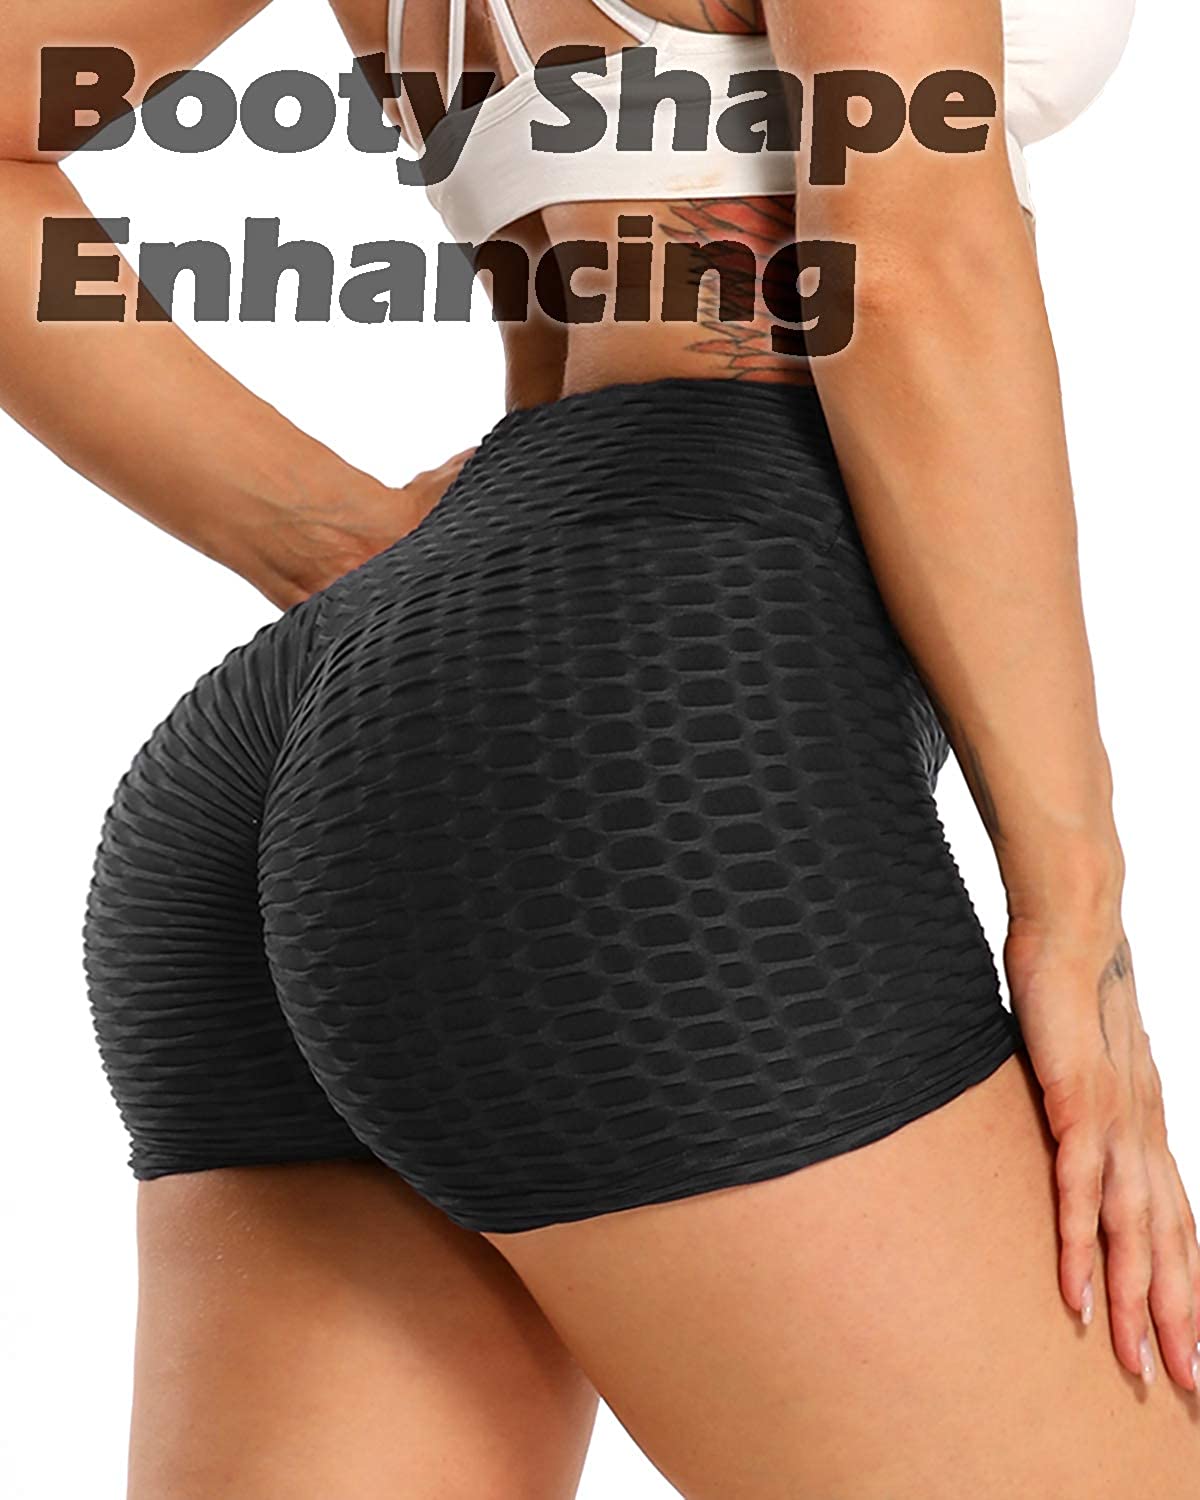 YOFIT Scrunch Butt Lifting Shorts for Women Gym Workout Spandex Booty  Shorts Yoga Pole Dance Fitness